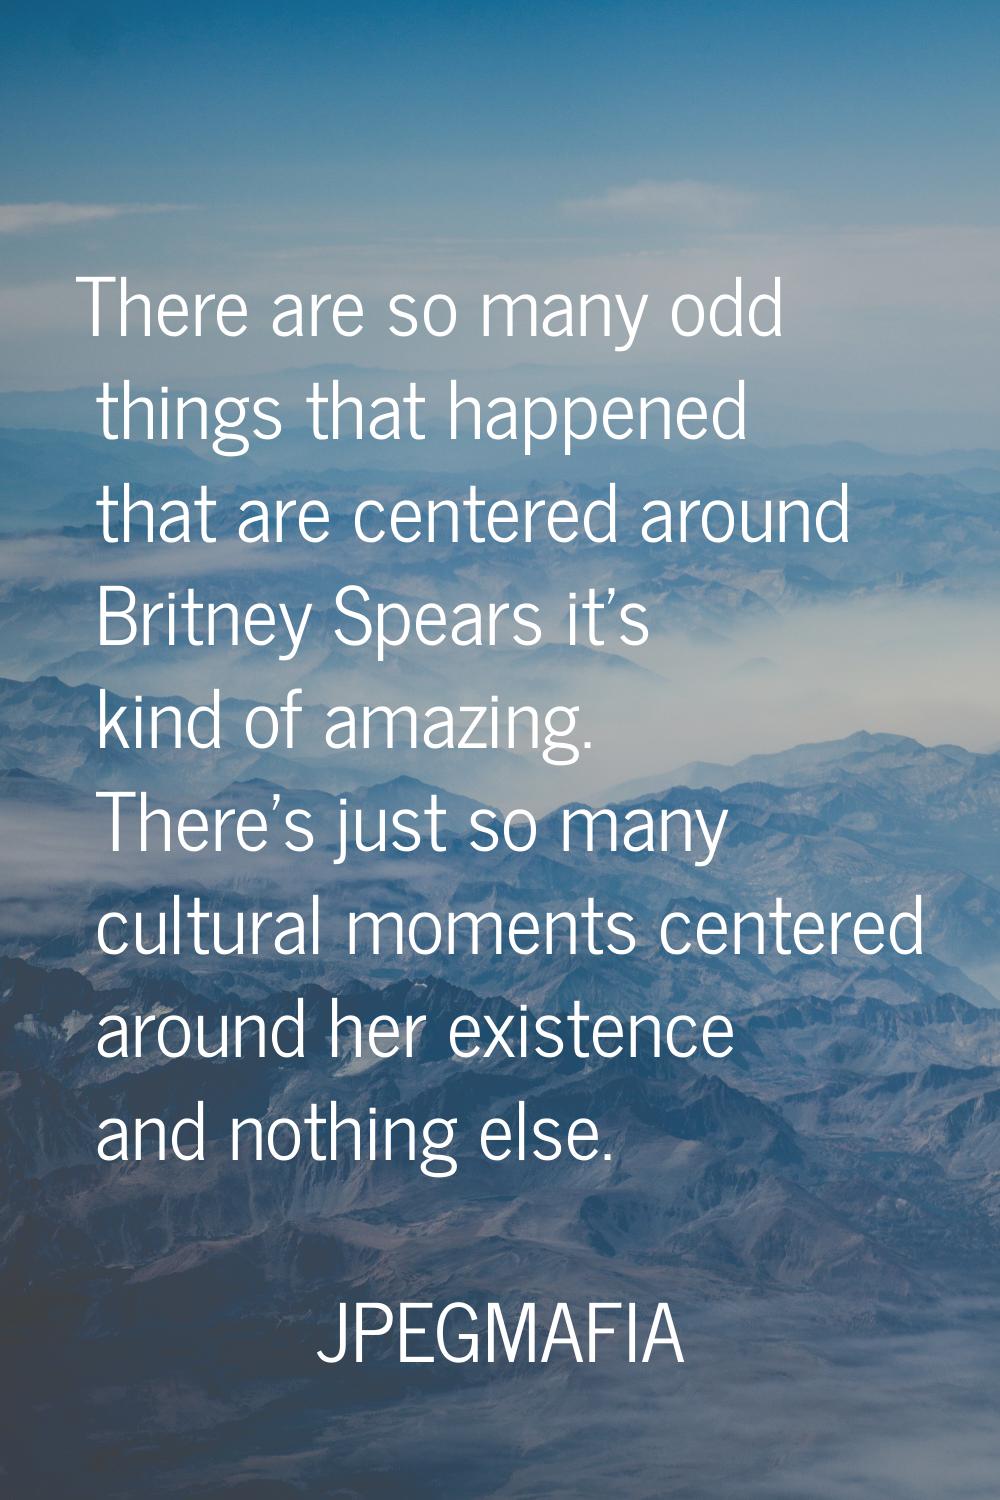 There are so many odd things that happened that are centered around Britney Spears it's kind of ama